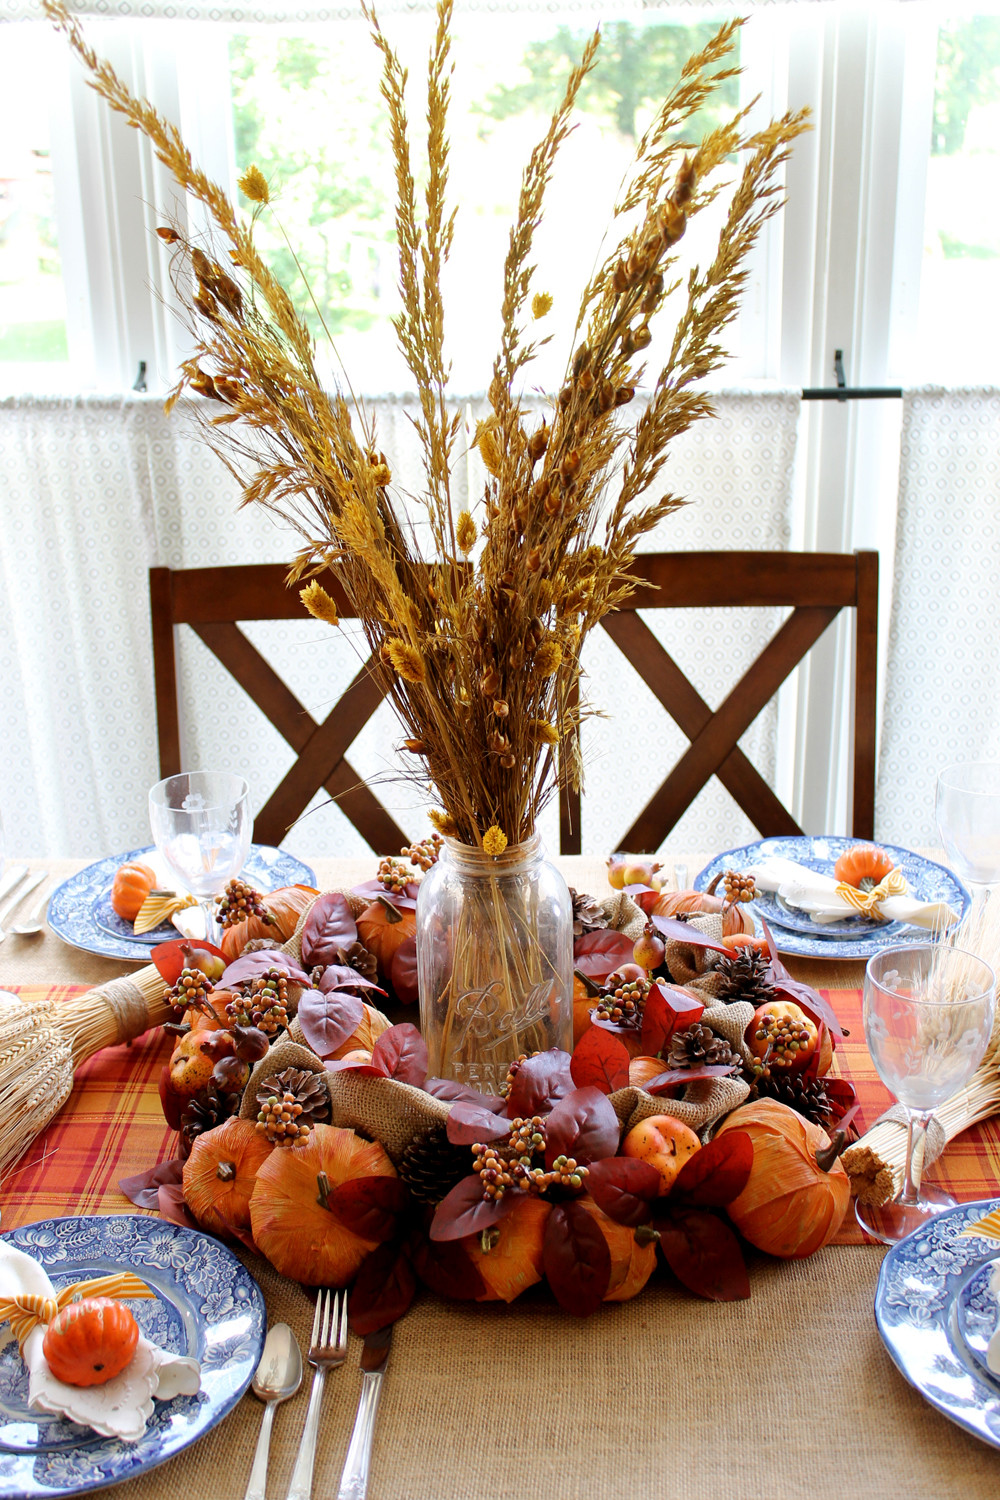 Diy Thanksgiving Table Decorations
 DIY Thanksgiving Decorations for Your Table The Country